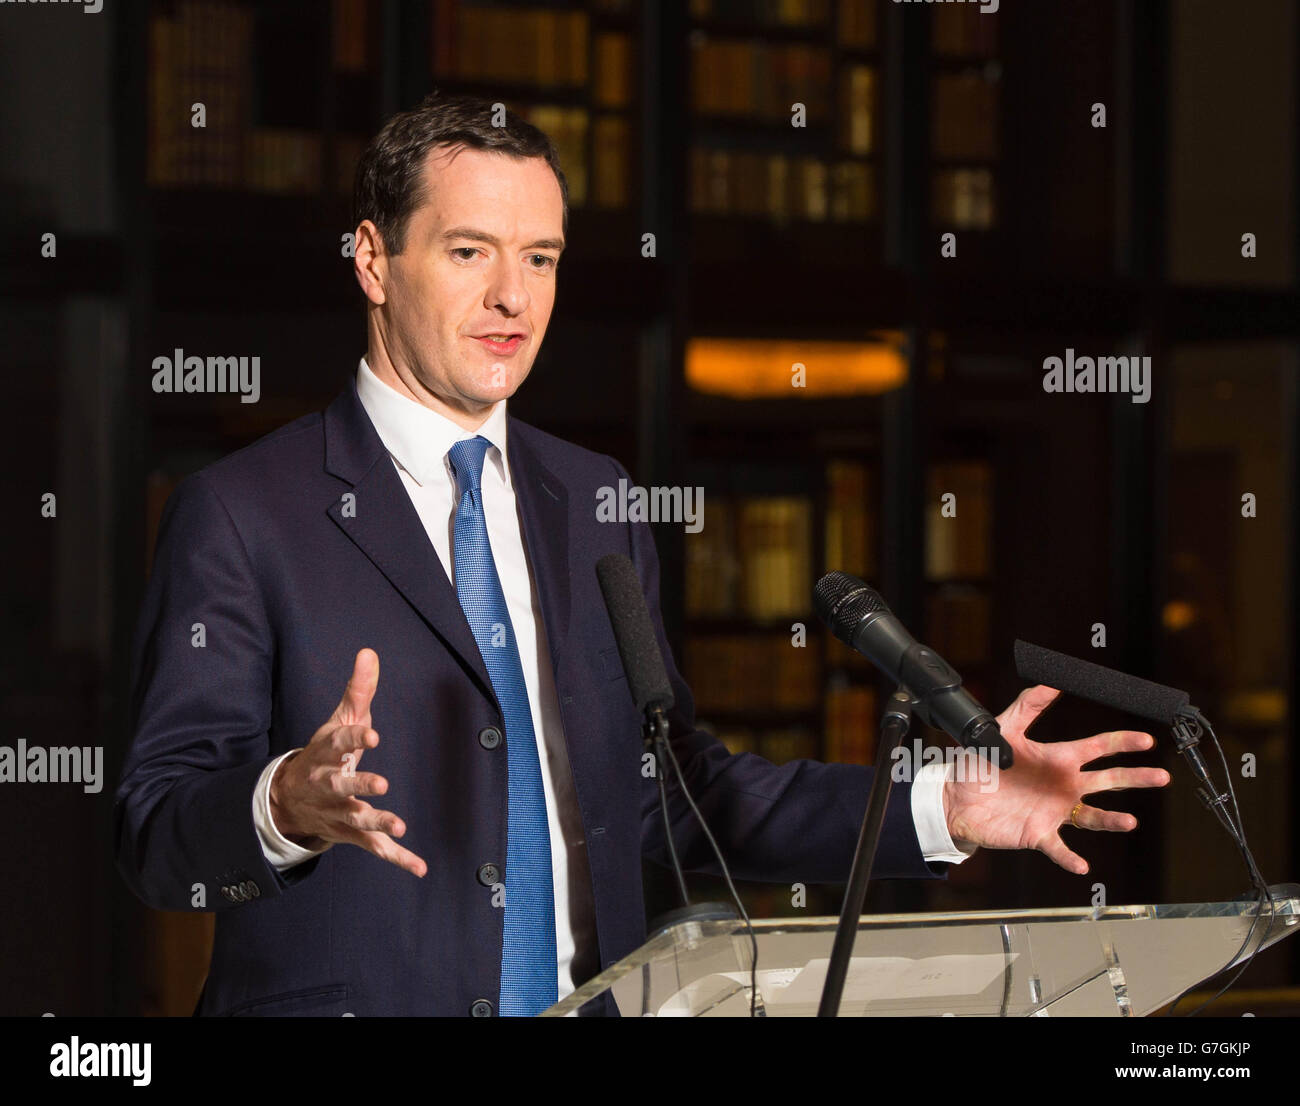 Chancellor of the Exchequer George Osborne speaks at the launch of the Knowledge Quarter, at the British Library in central London. Stock Photo